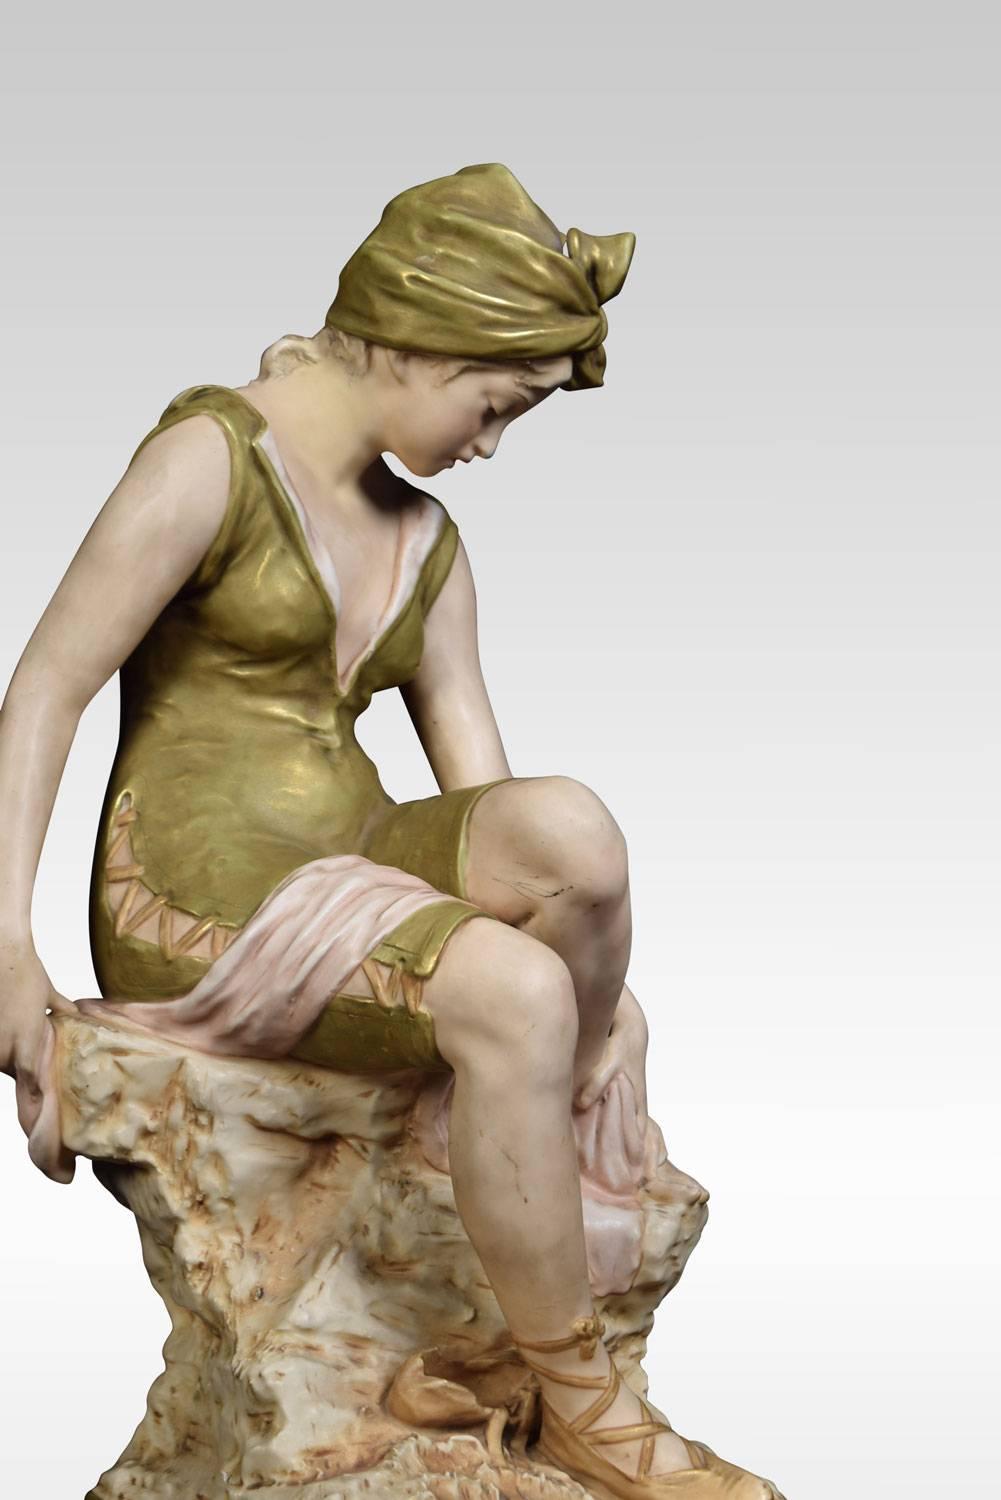 Royal Dux Bohemia porcelain figure of a bather modelled seated on a rock wearing a laced swim suit, head scarf and laced slippers, drying one foot with a towel on canted square base, applied pink triangle.
Dimensions:
Height 22 inches
Width 11.5